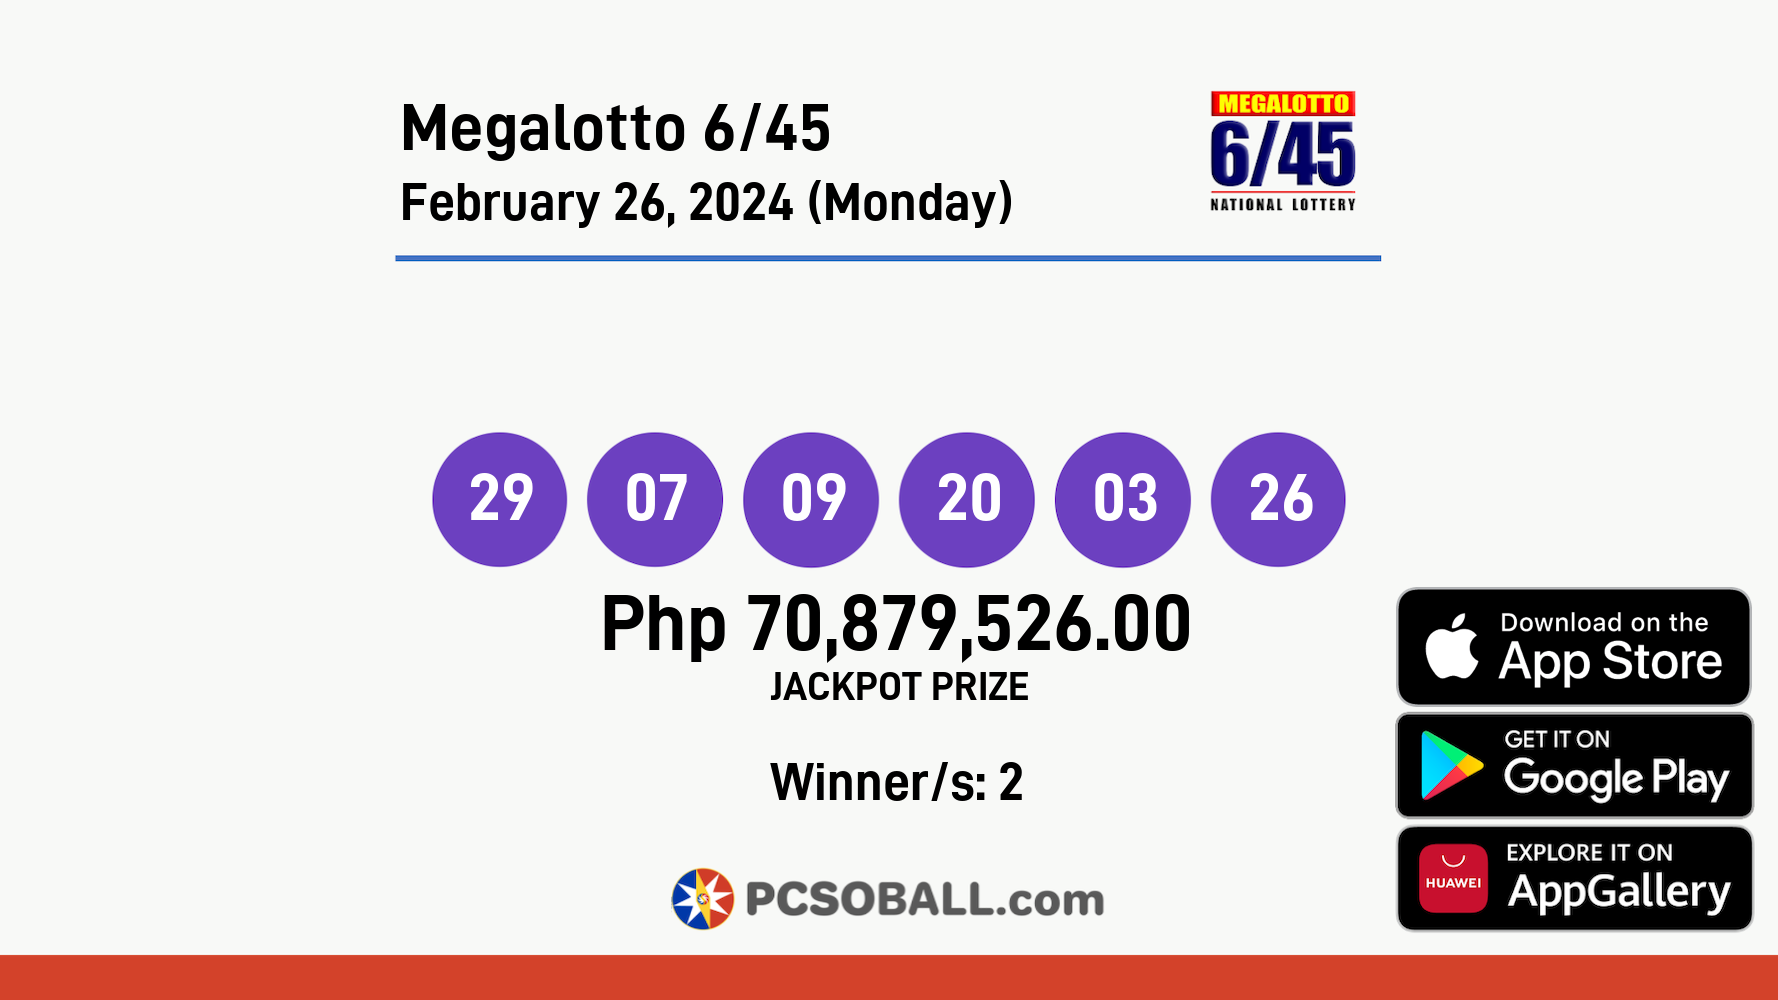 Megalotto 6/45 February 26, 2024 (Monday) Result